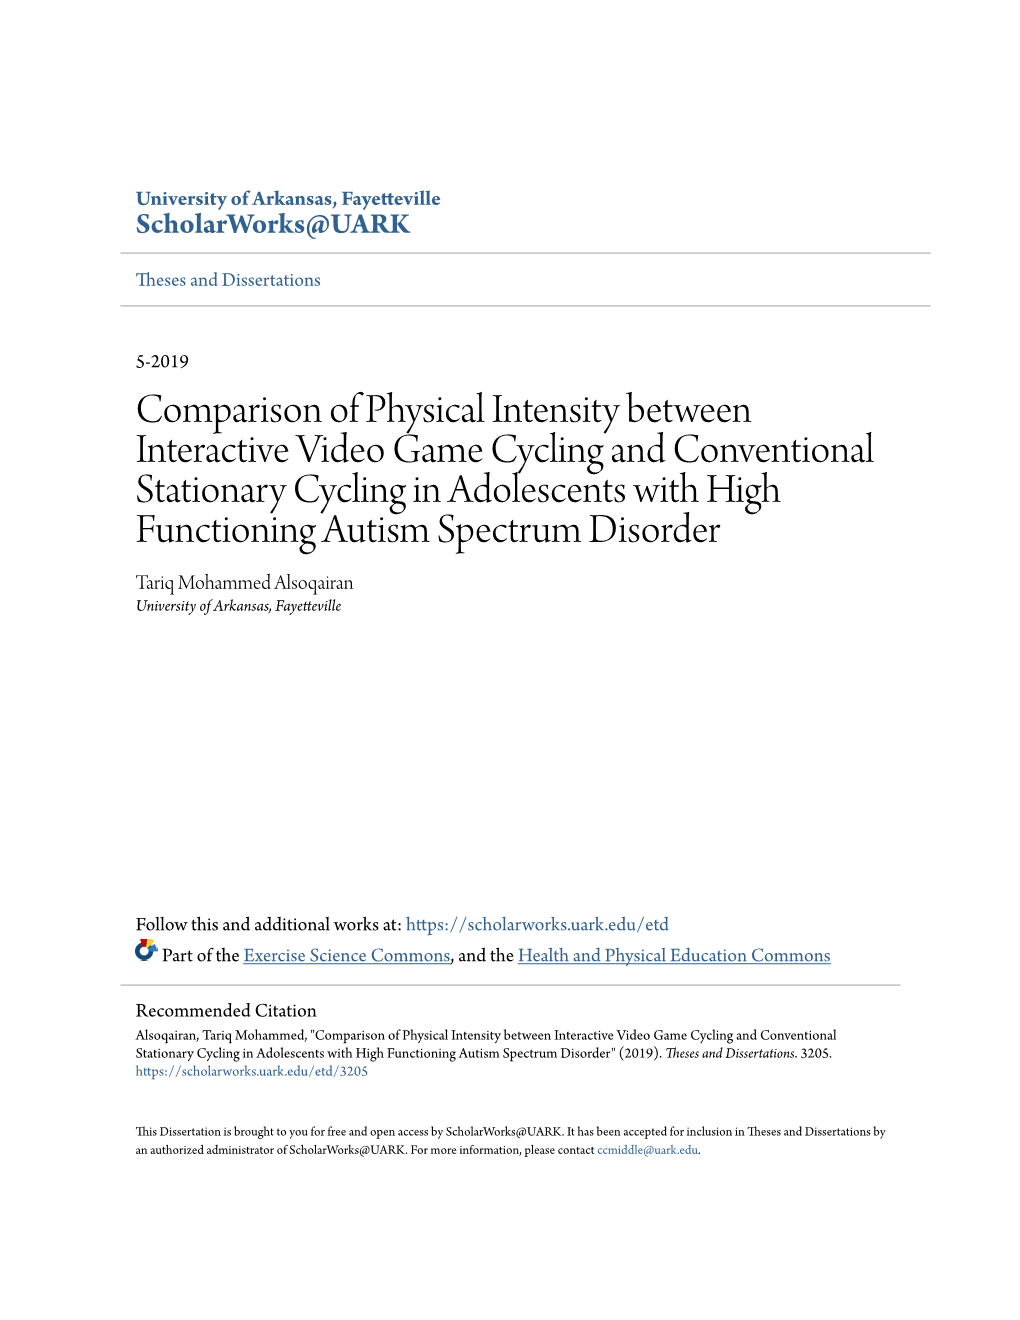 Comparison of Physical Intensity Between Interactive Video Game Cycling and Conventional Stationary Cycling in Adolescents With